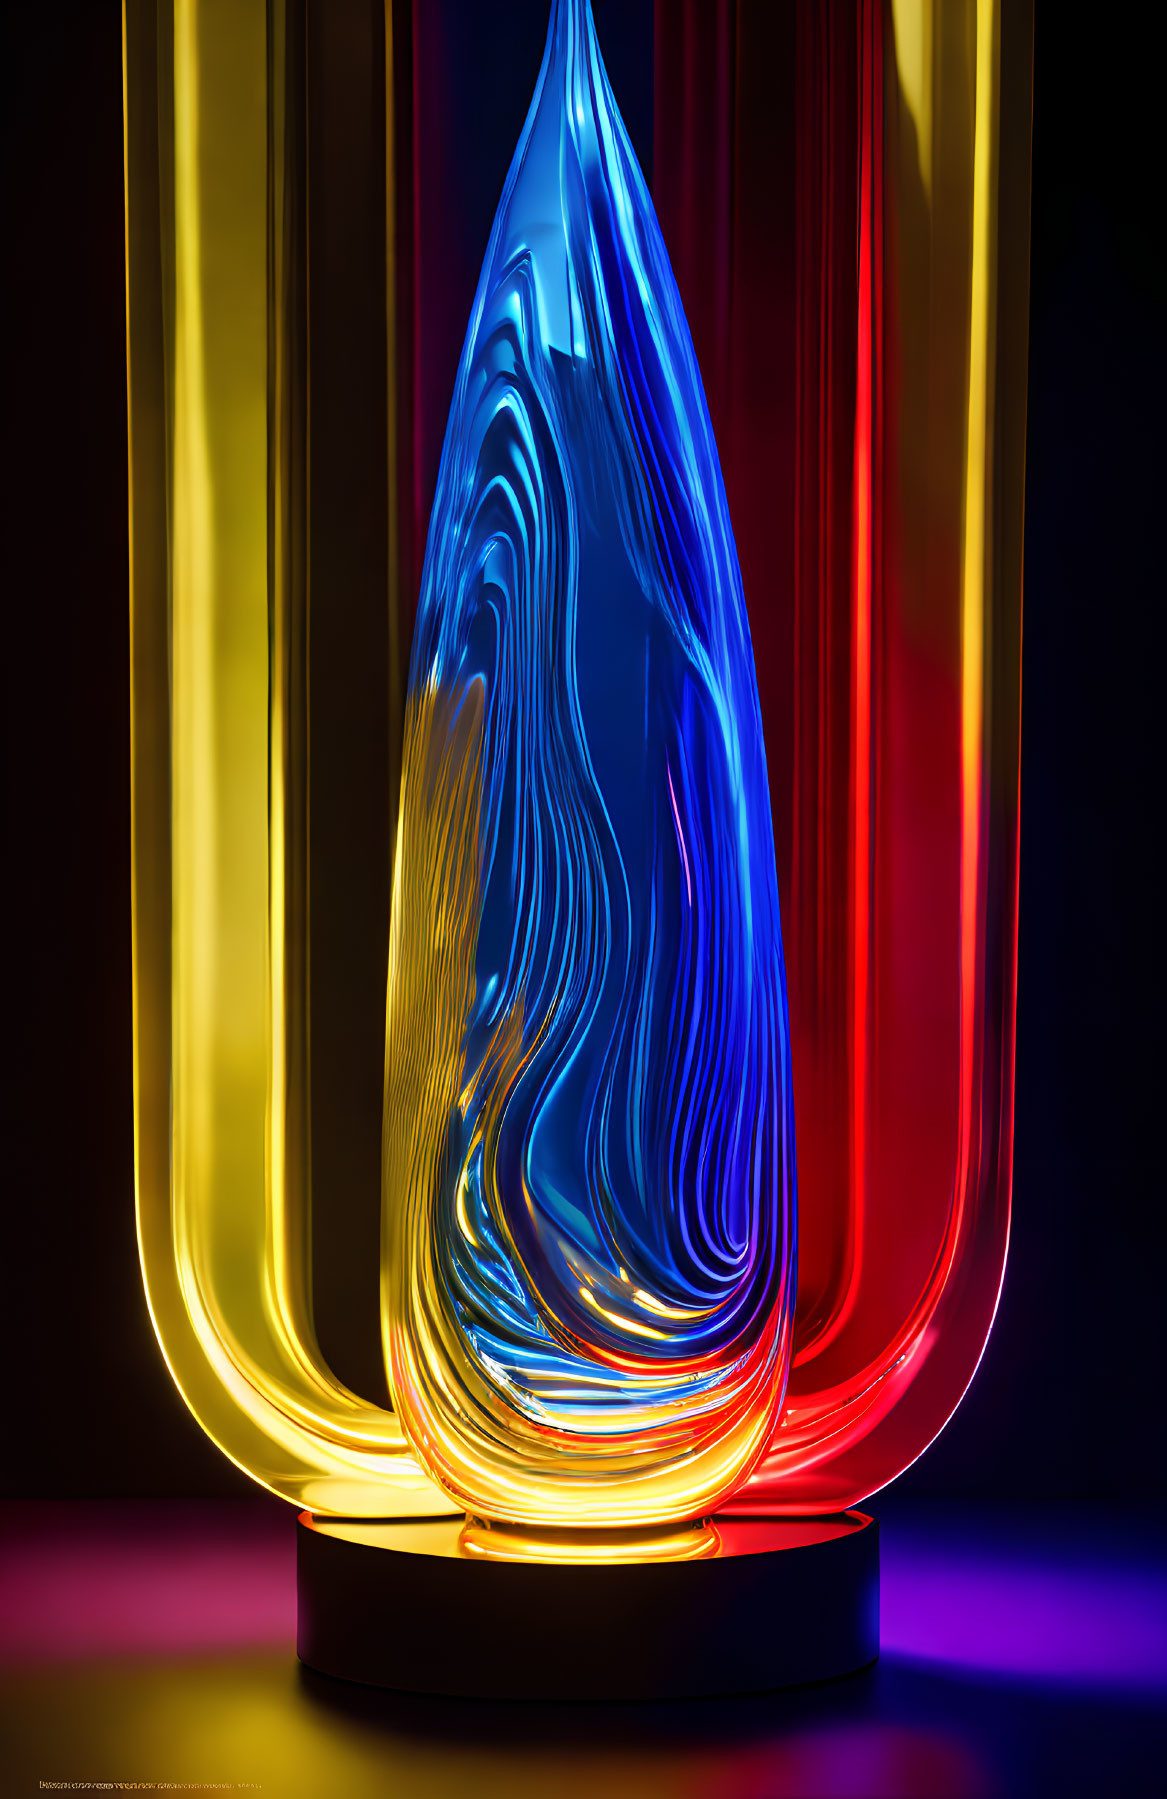 Vibrant twisted glass tubes on dark background